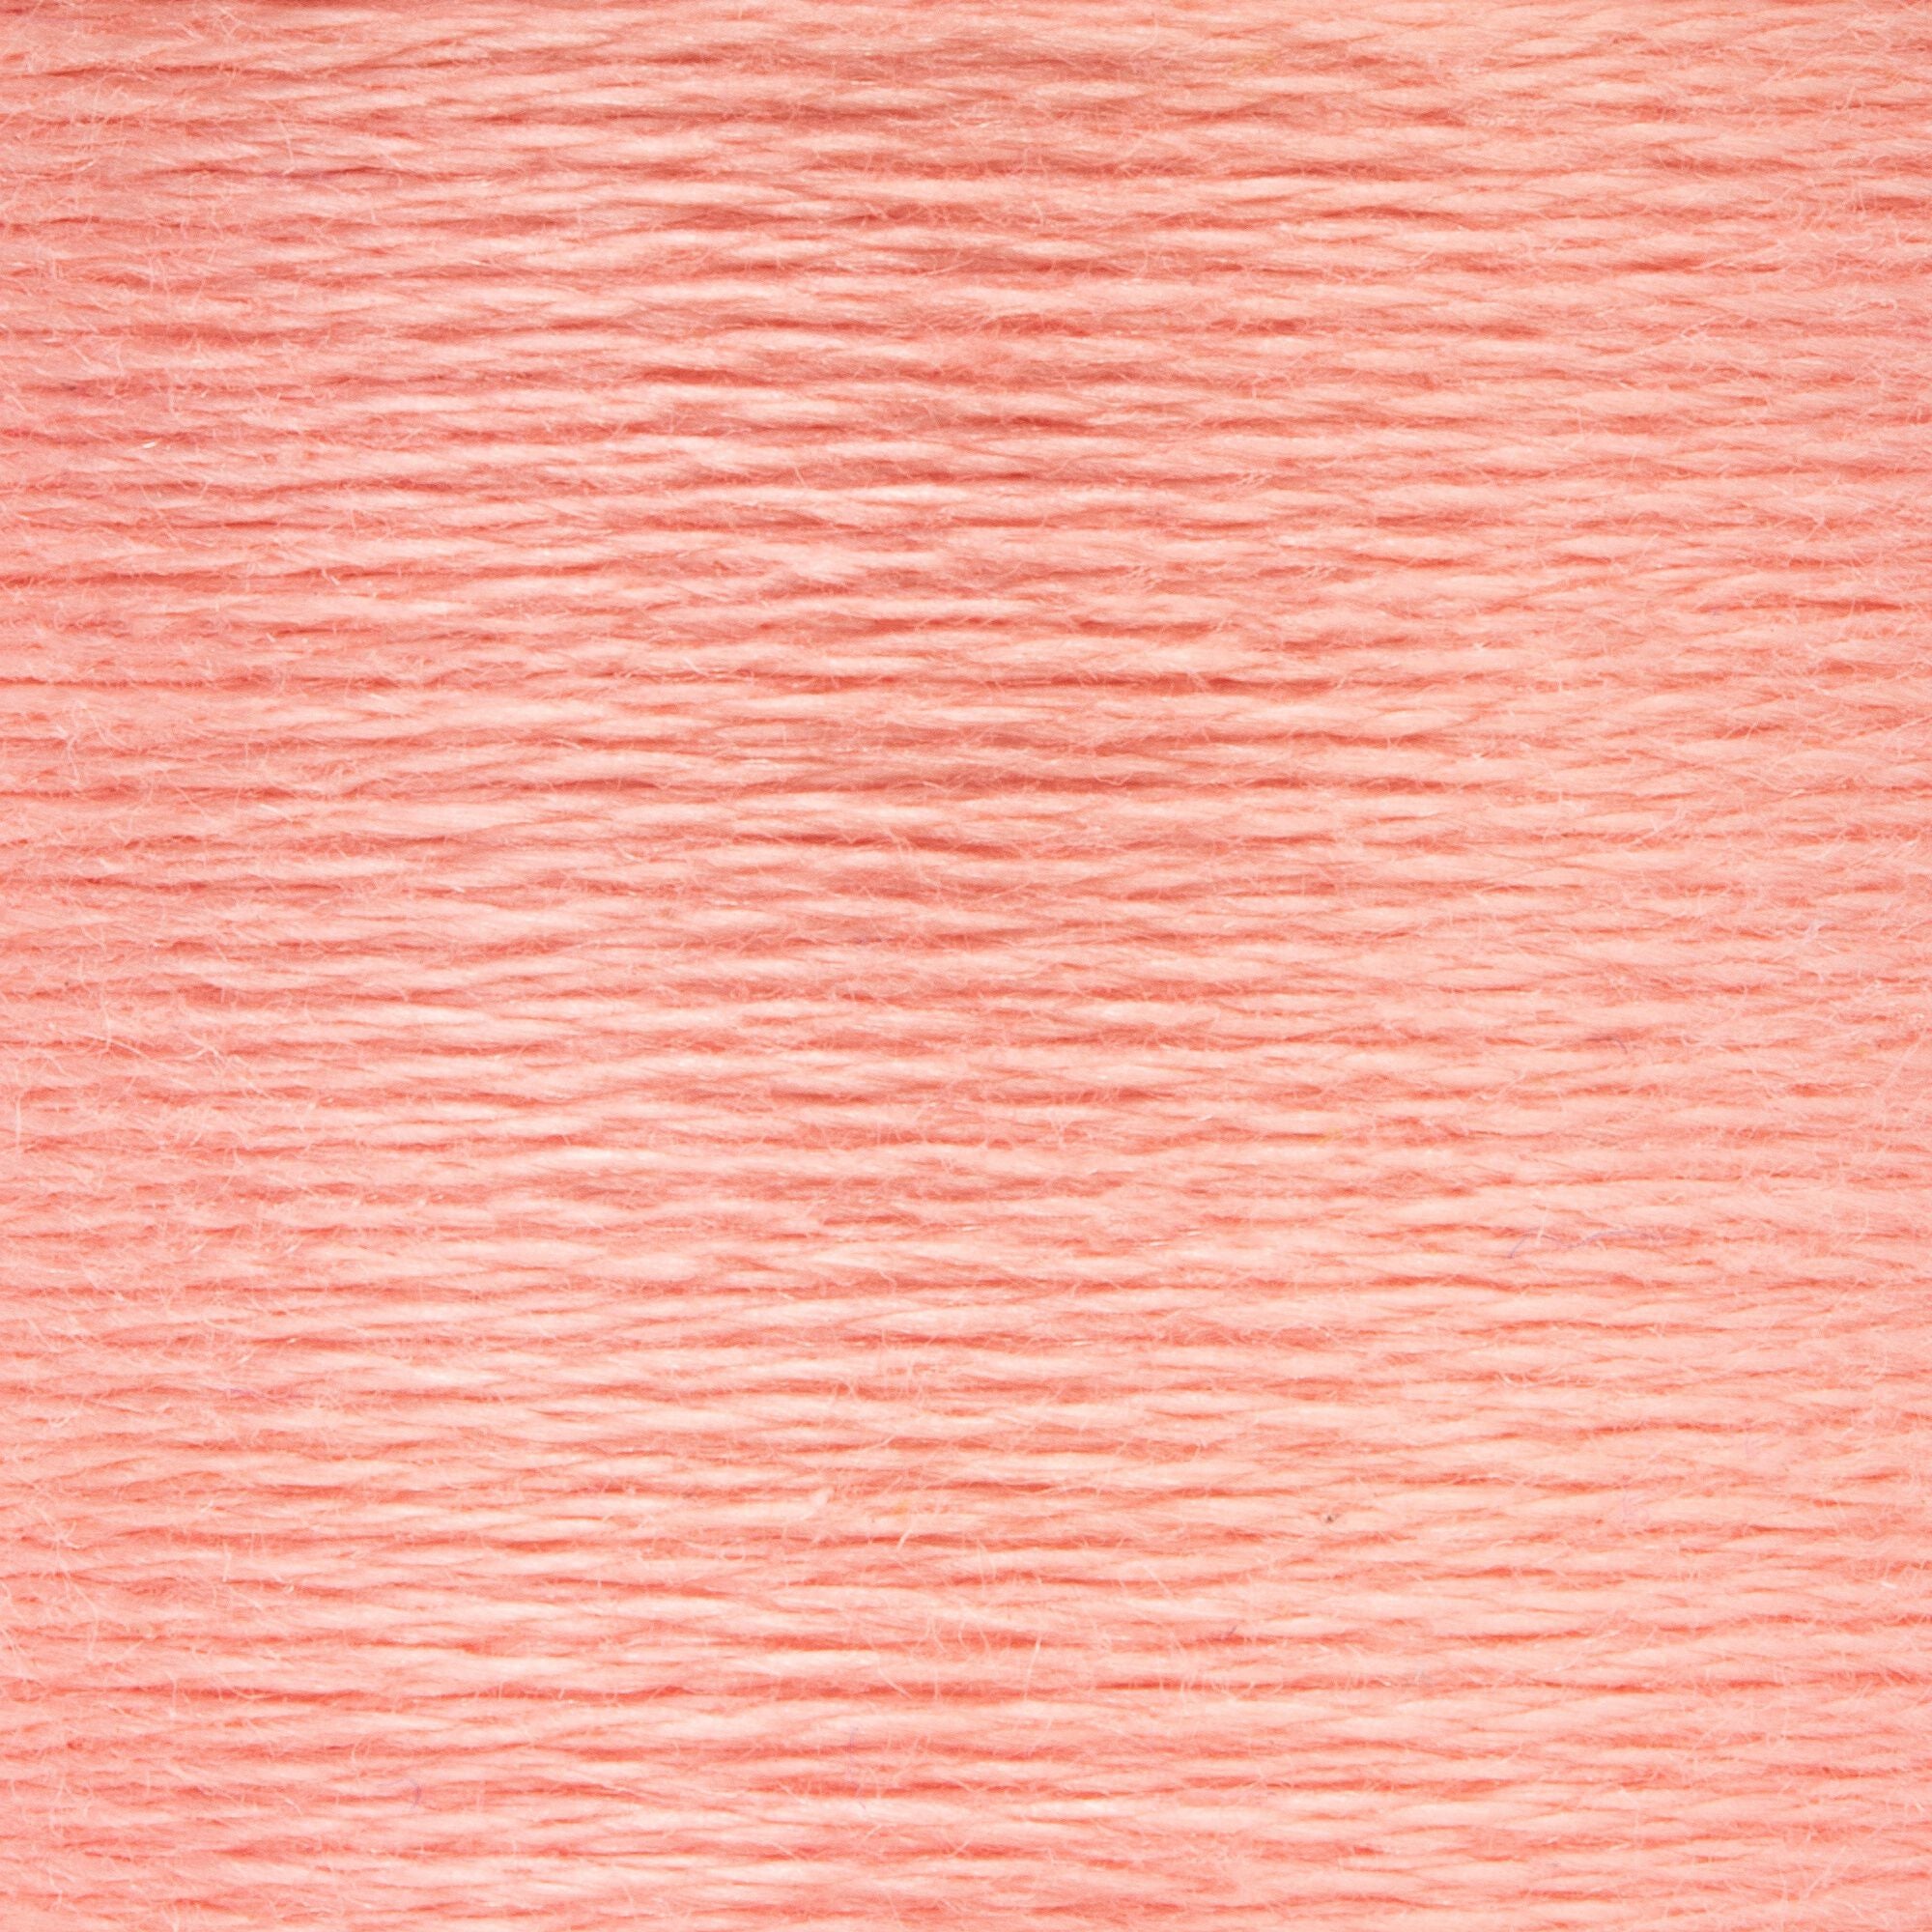 Anchor Embroidery Floss in Salmon Lt